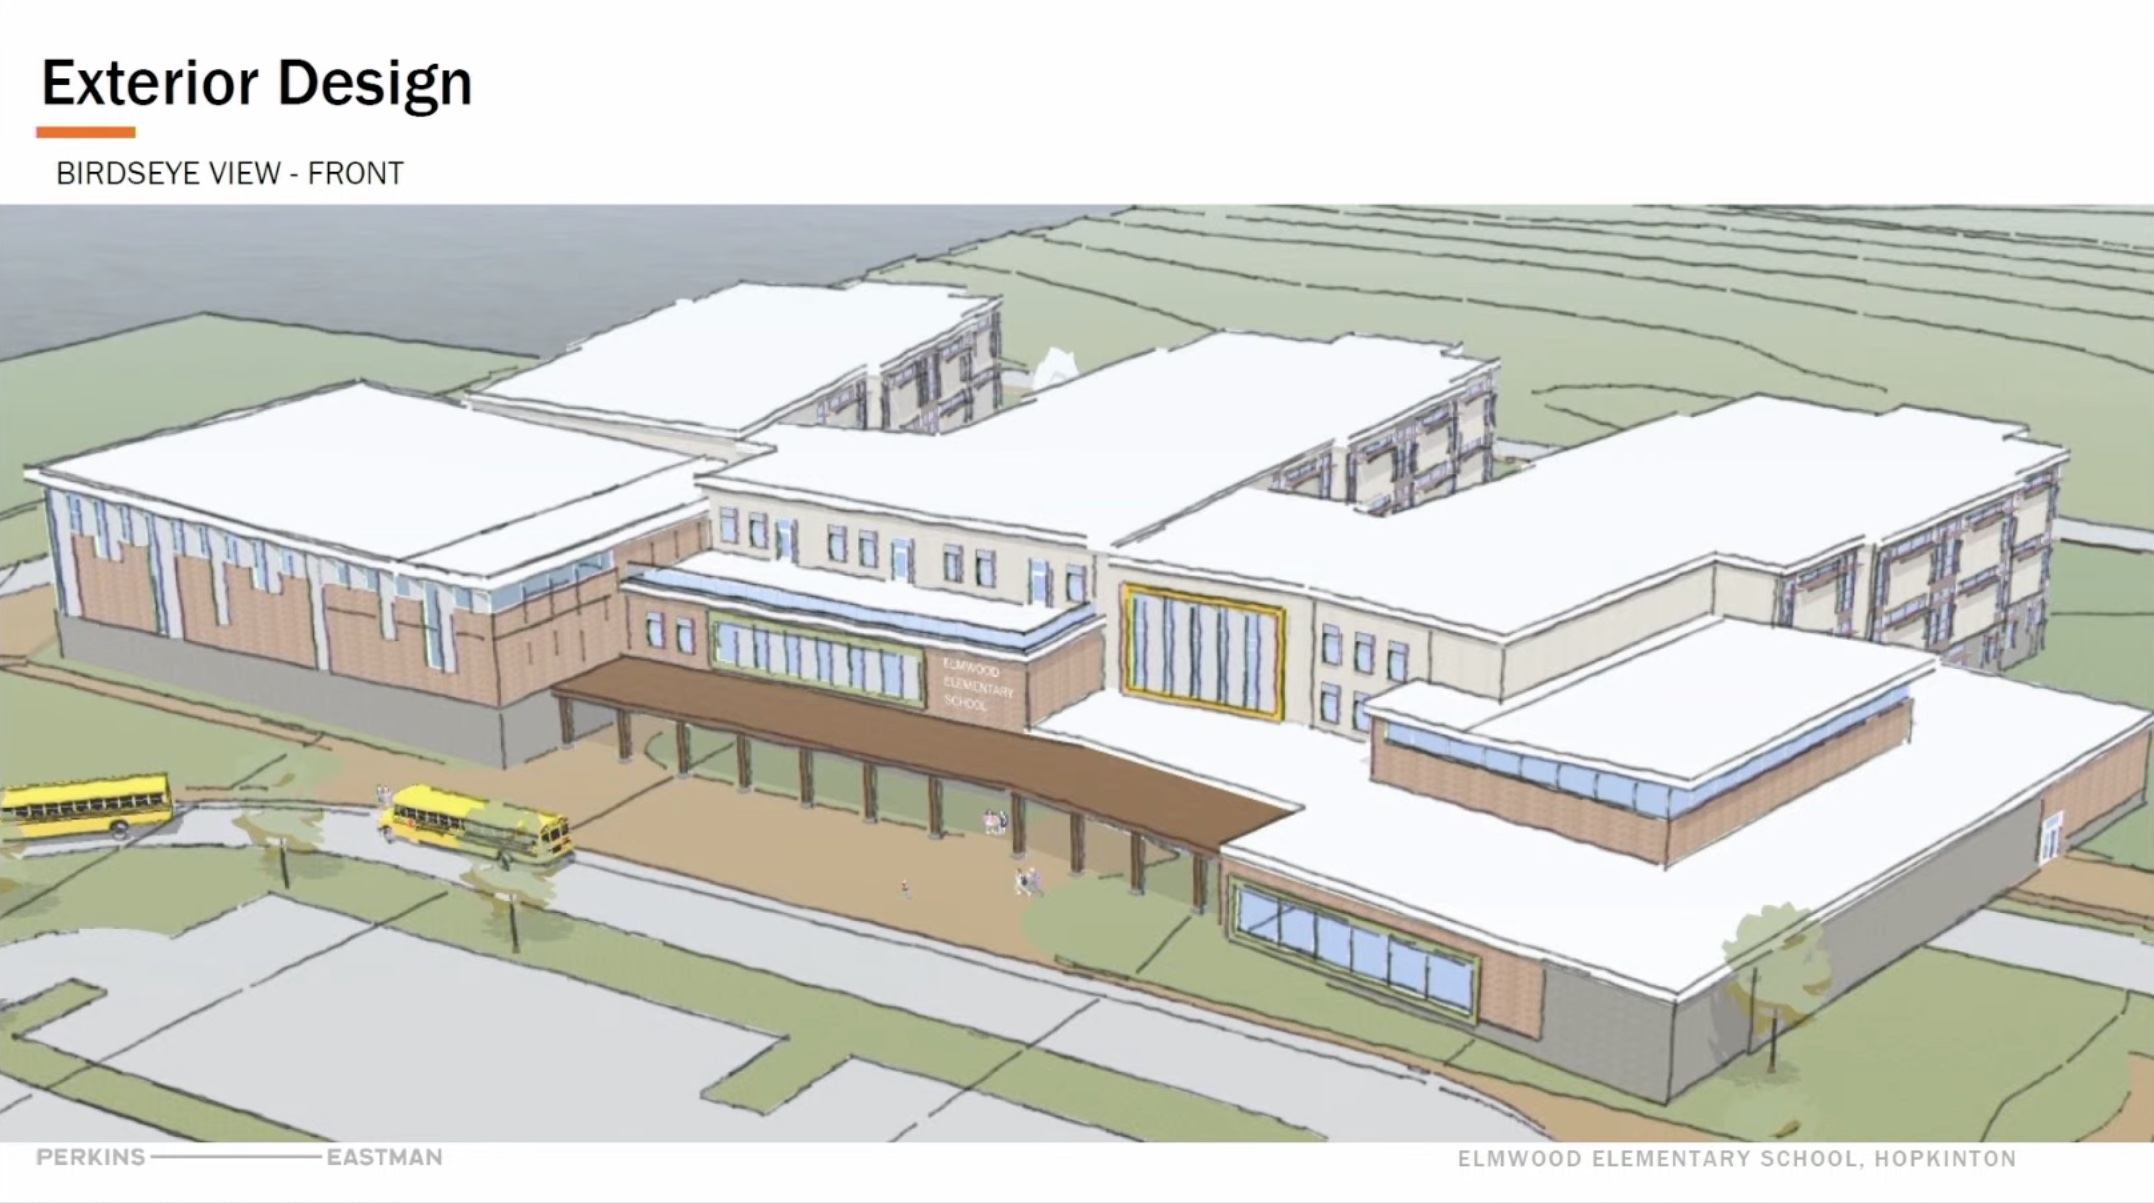 Process underway to name new elementary school; community input sought